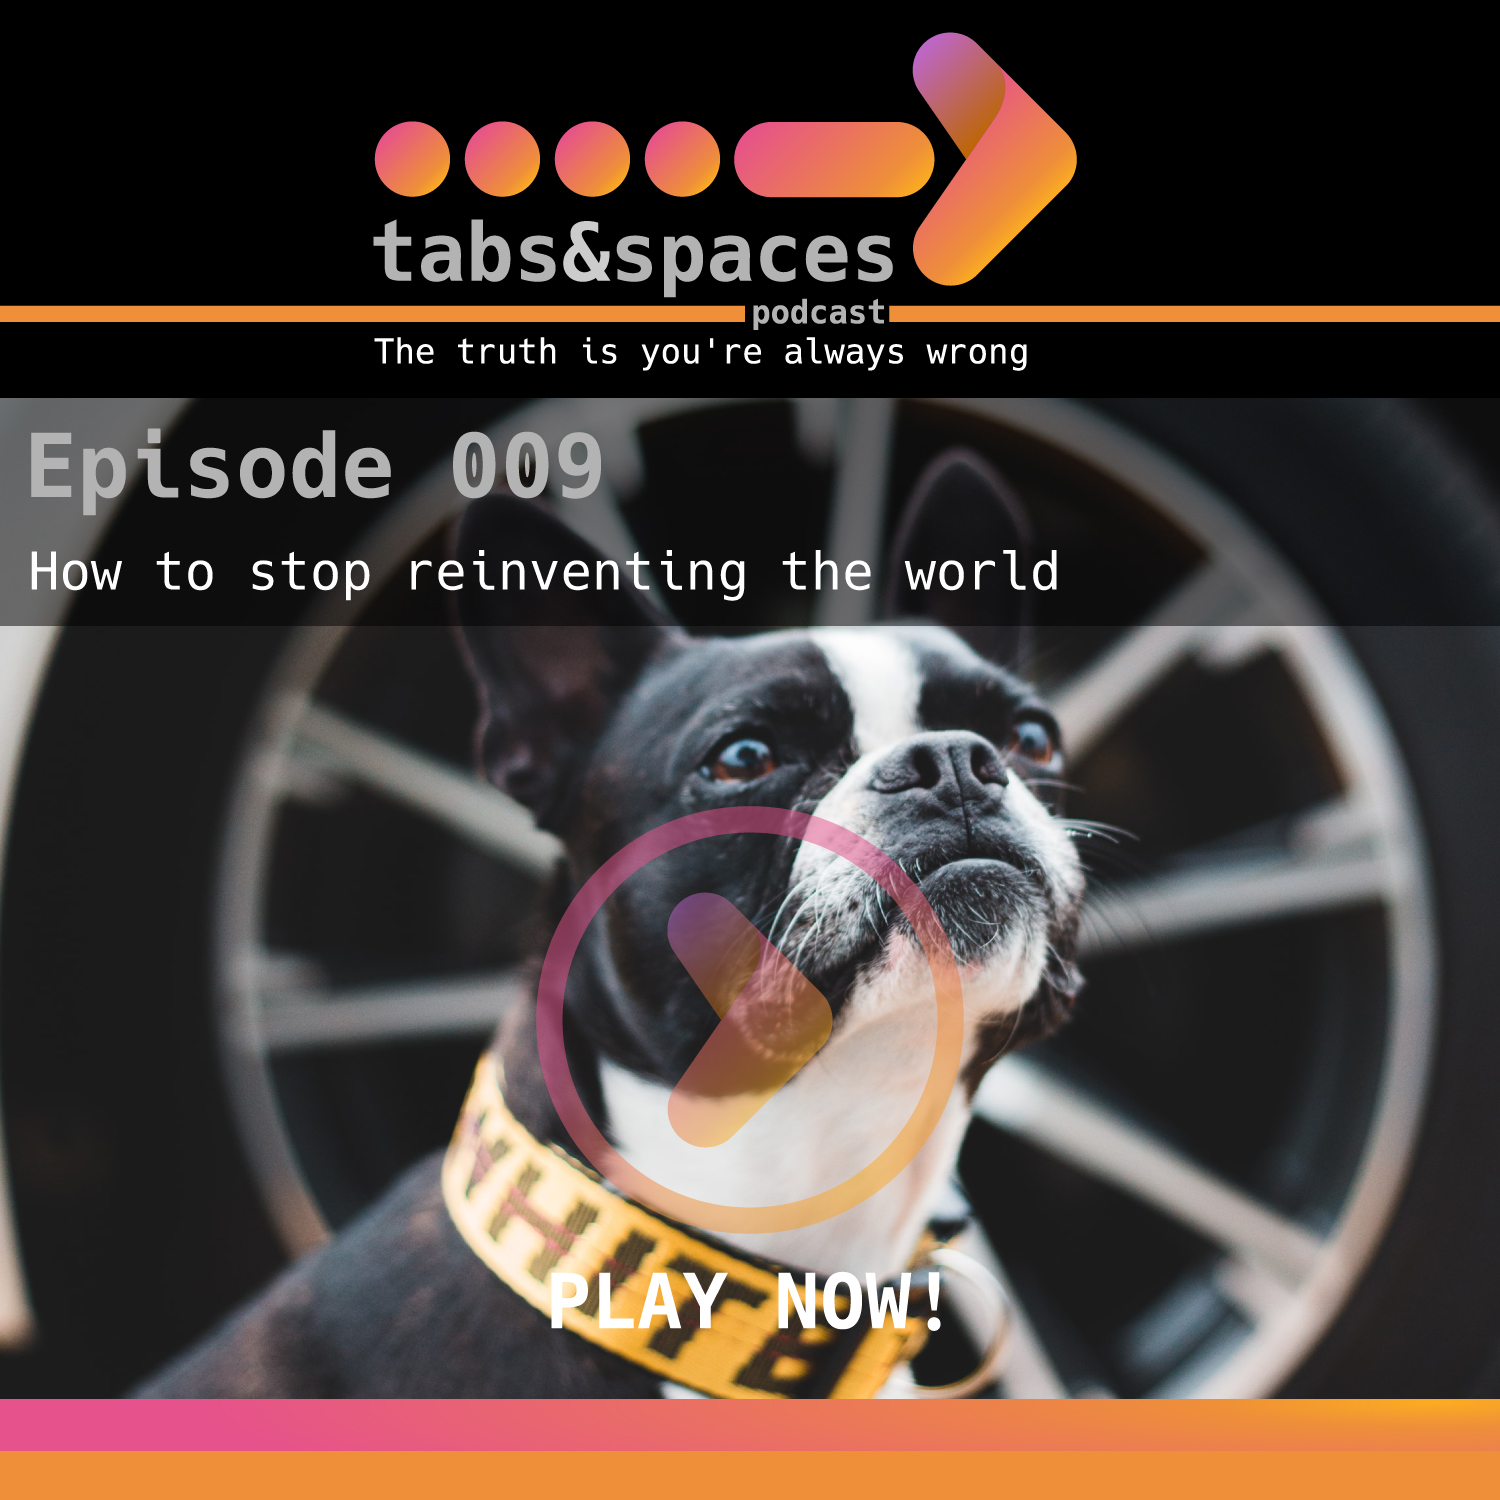 Episode 9 is about how to feel alright about see bad code in your codebase